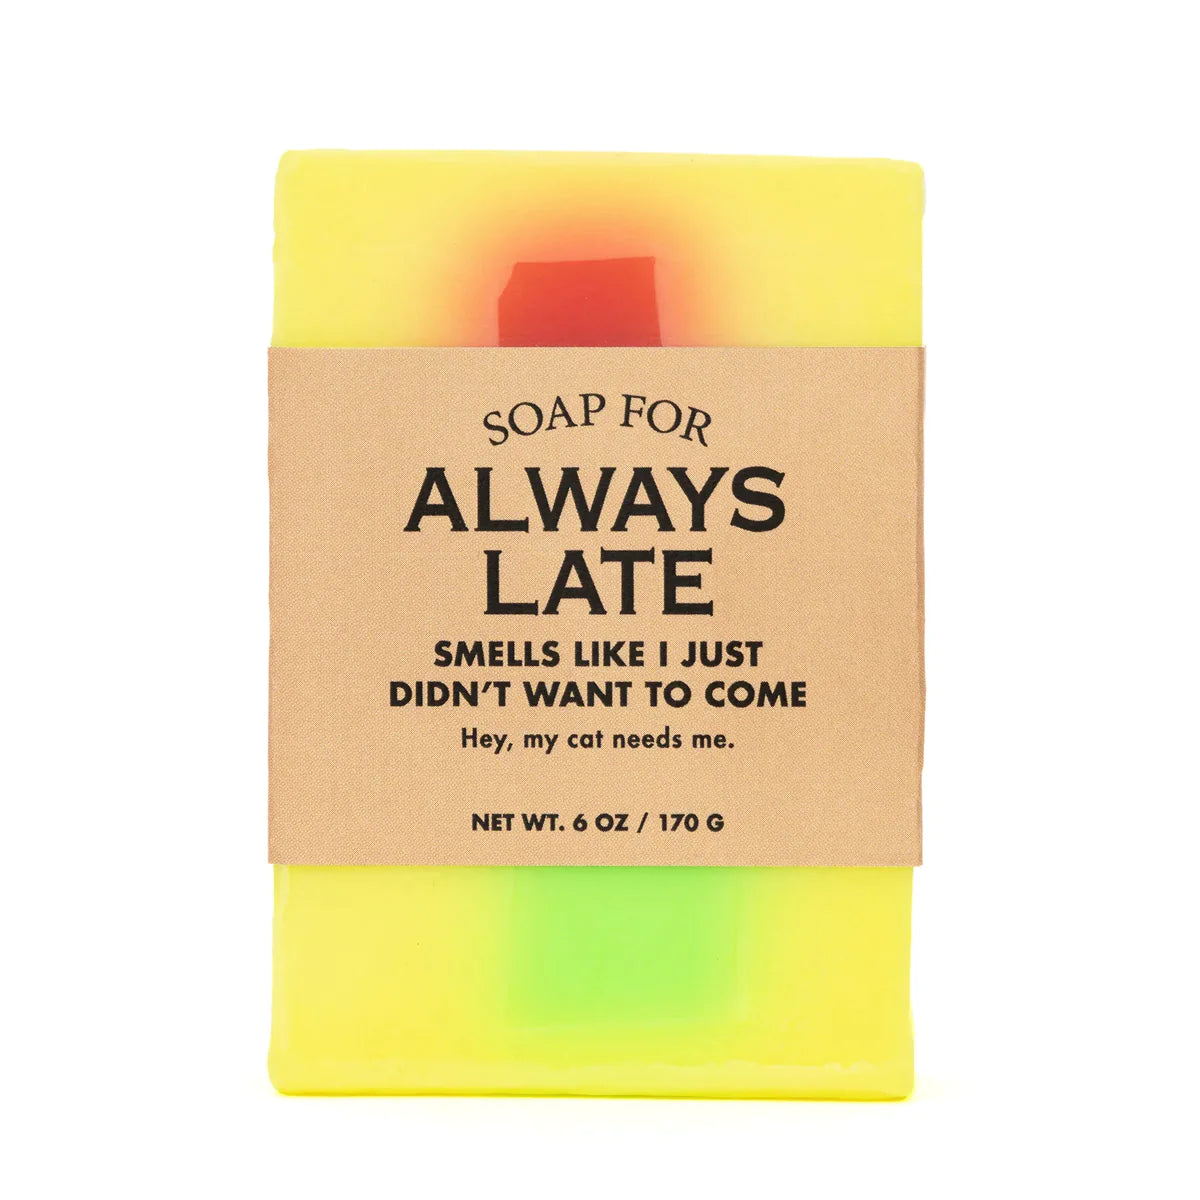 Whisky River Soap Co. - A Soap For Always Late